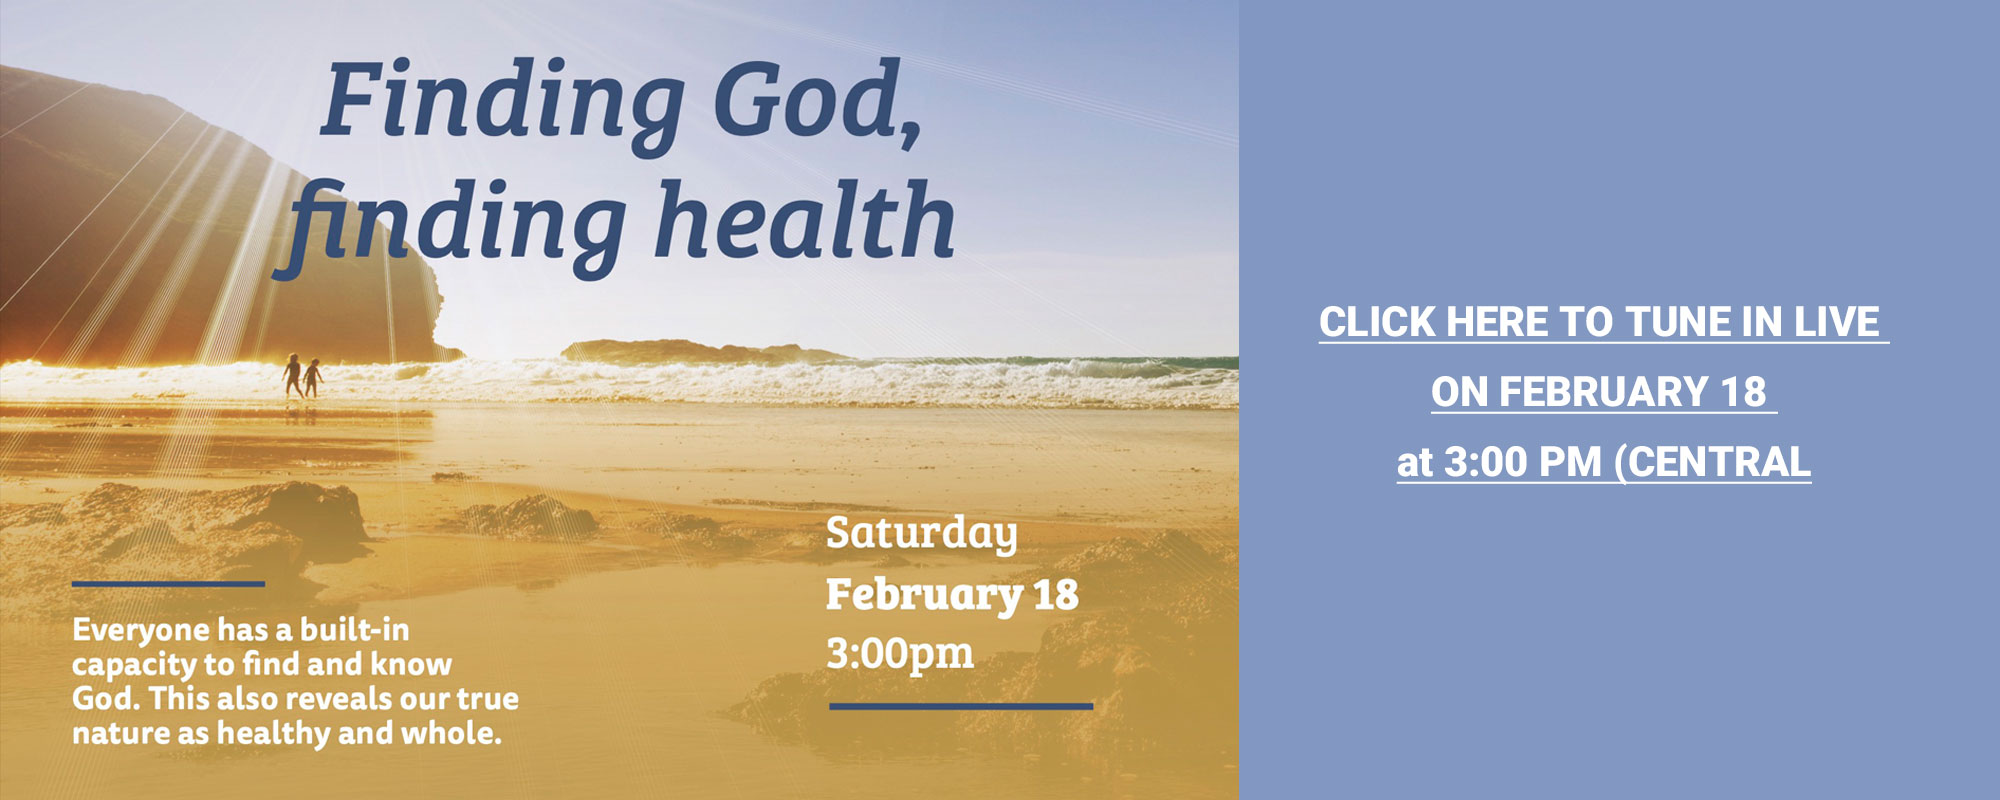 Finding God, Finding Health, by Michelle Nanouche, CSB